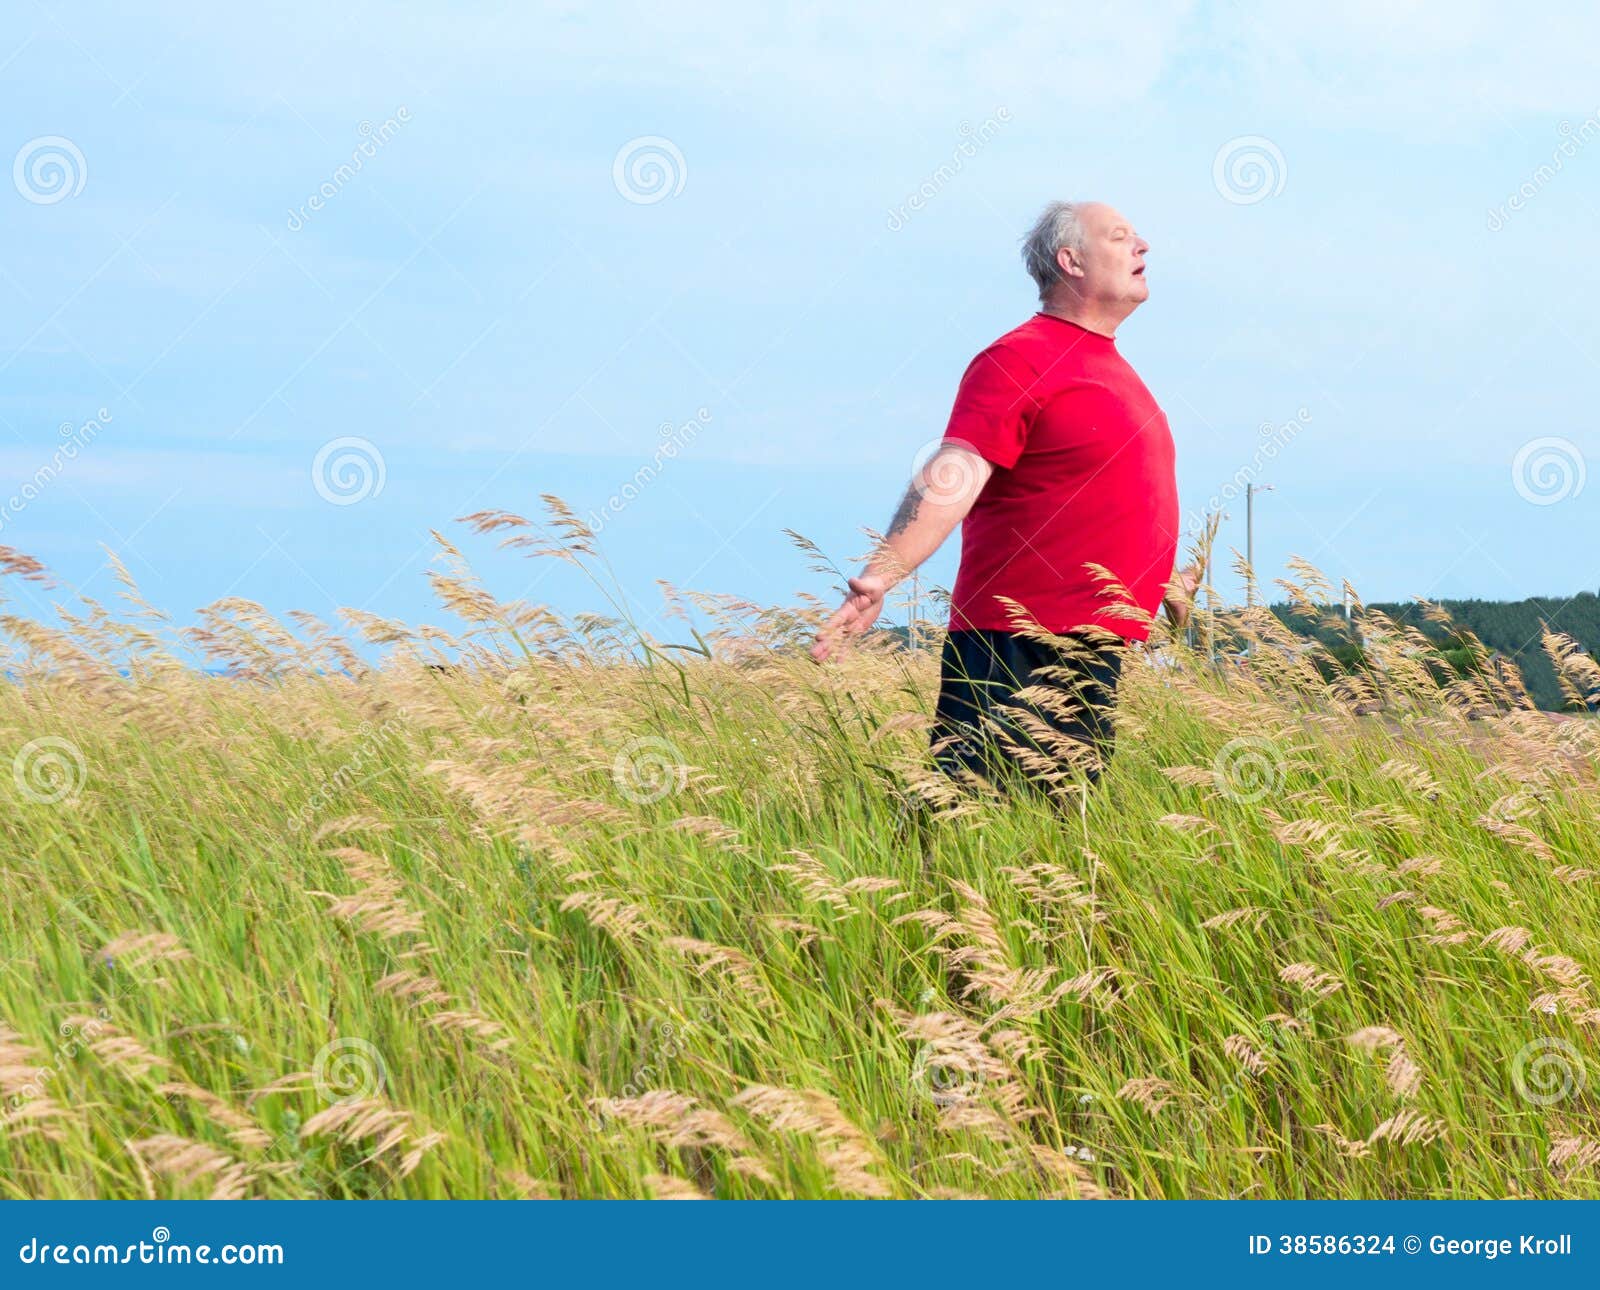 man in field with breeze